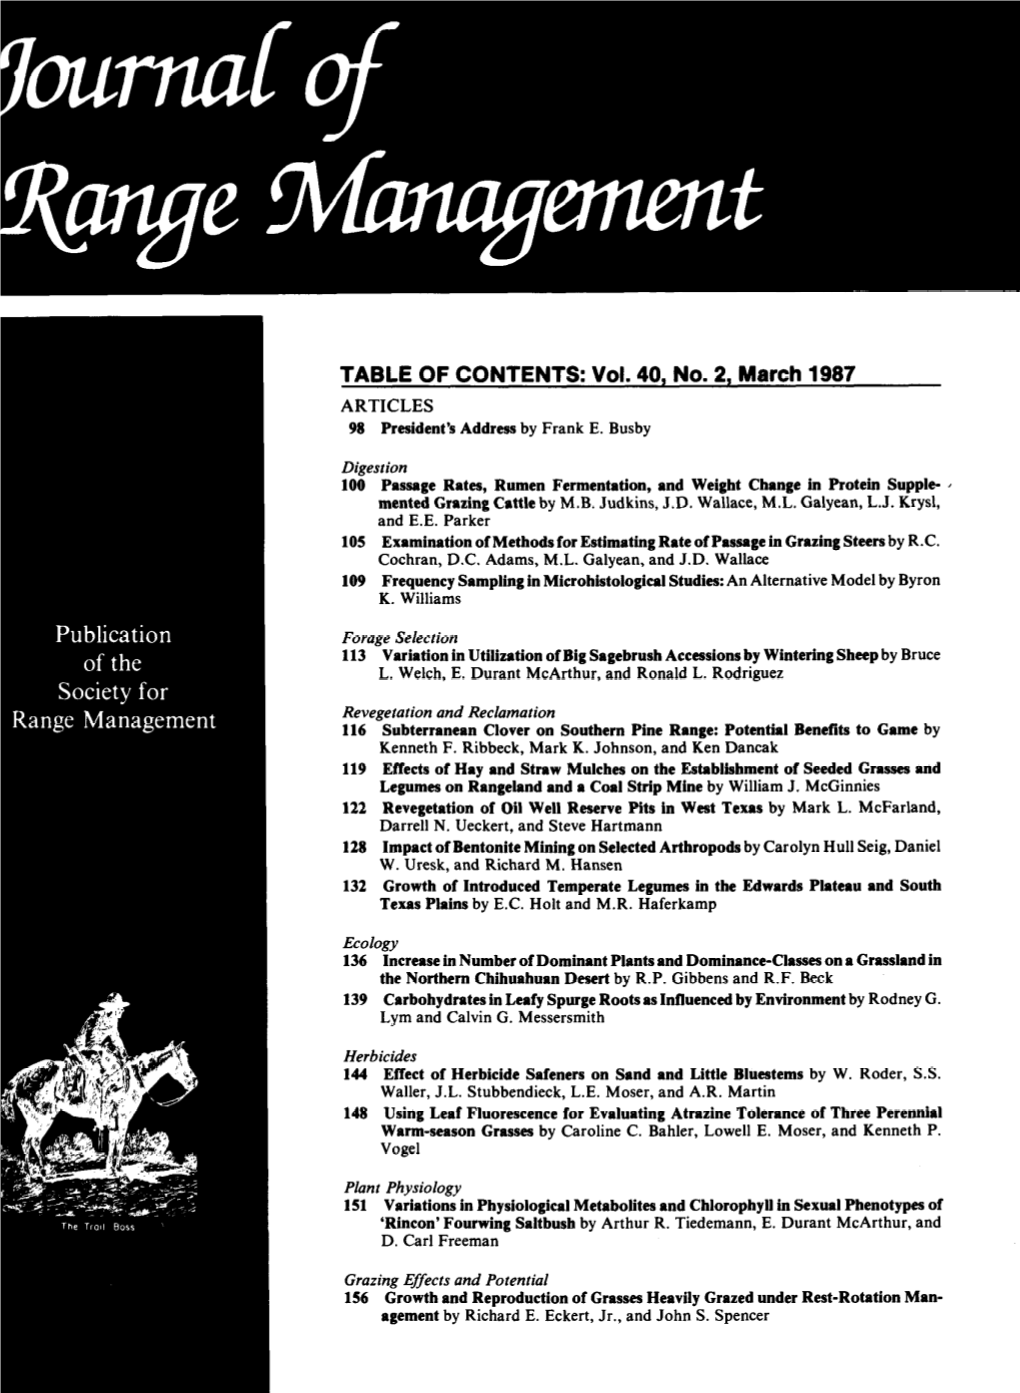 TABLE of CONTENTS: Vol. 40, No. 2, March 1987 ARTICLES 98 Hesident’S Address by Frank E